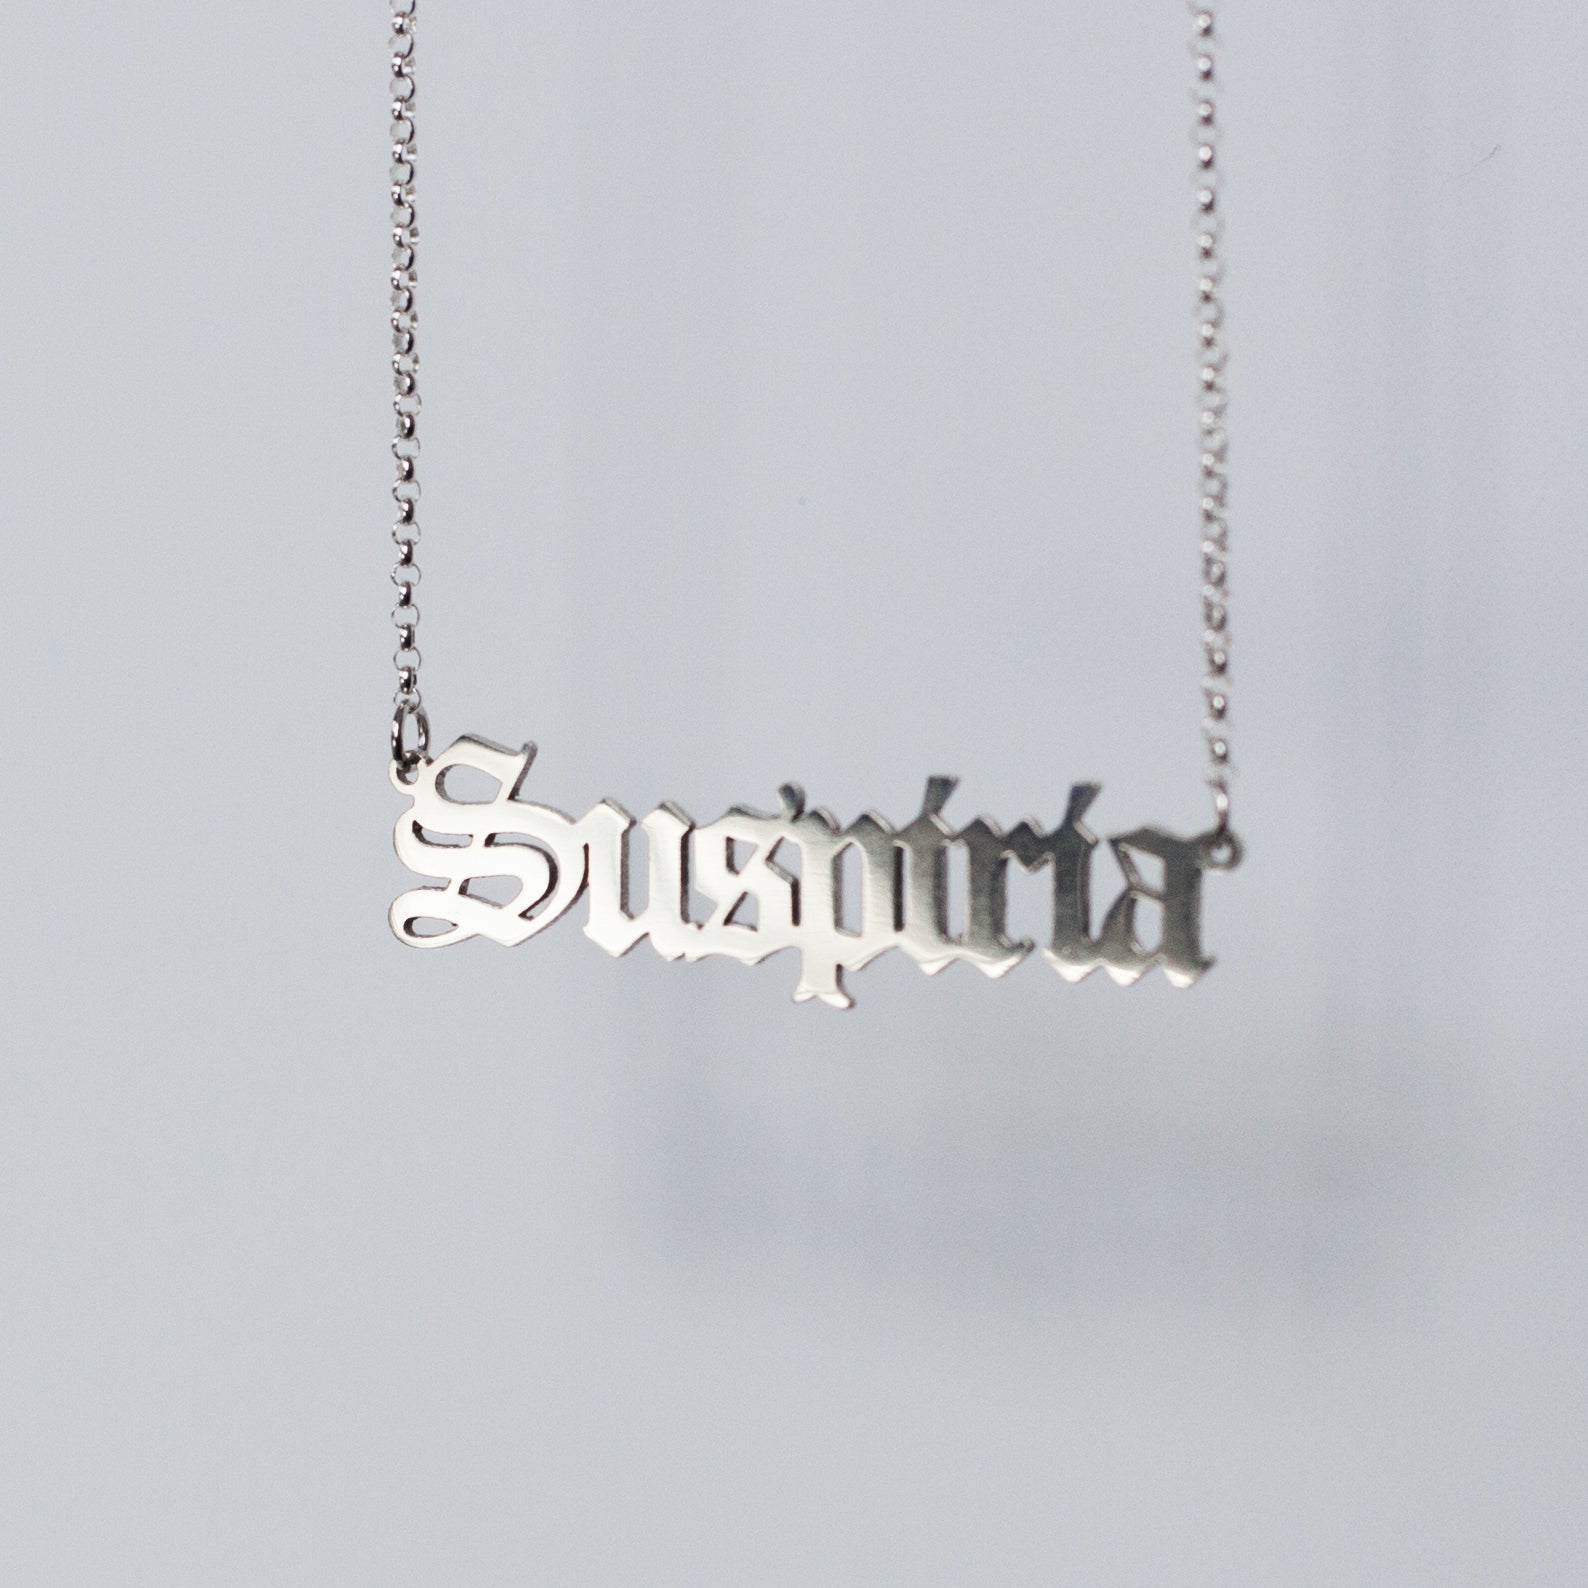 Suspiria Necklace in gothic blackletter font handmade in sterling silver. 